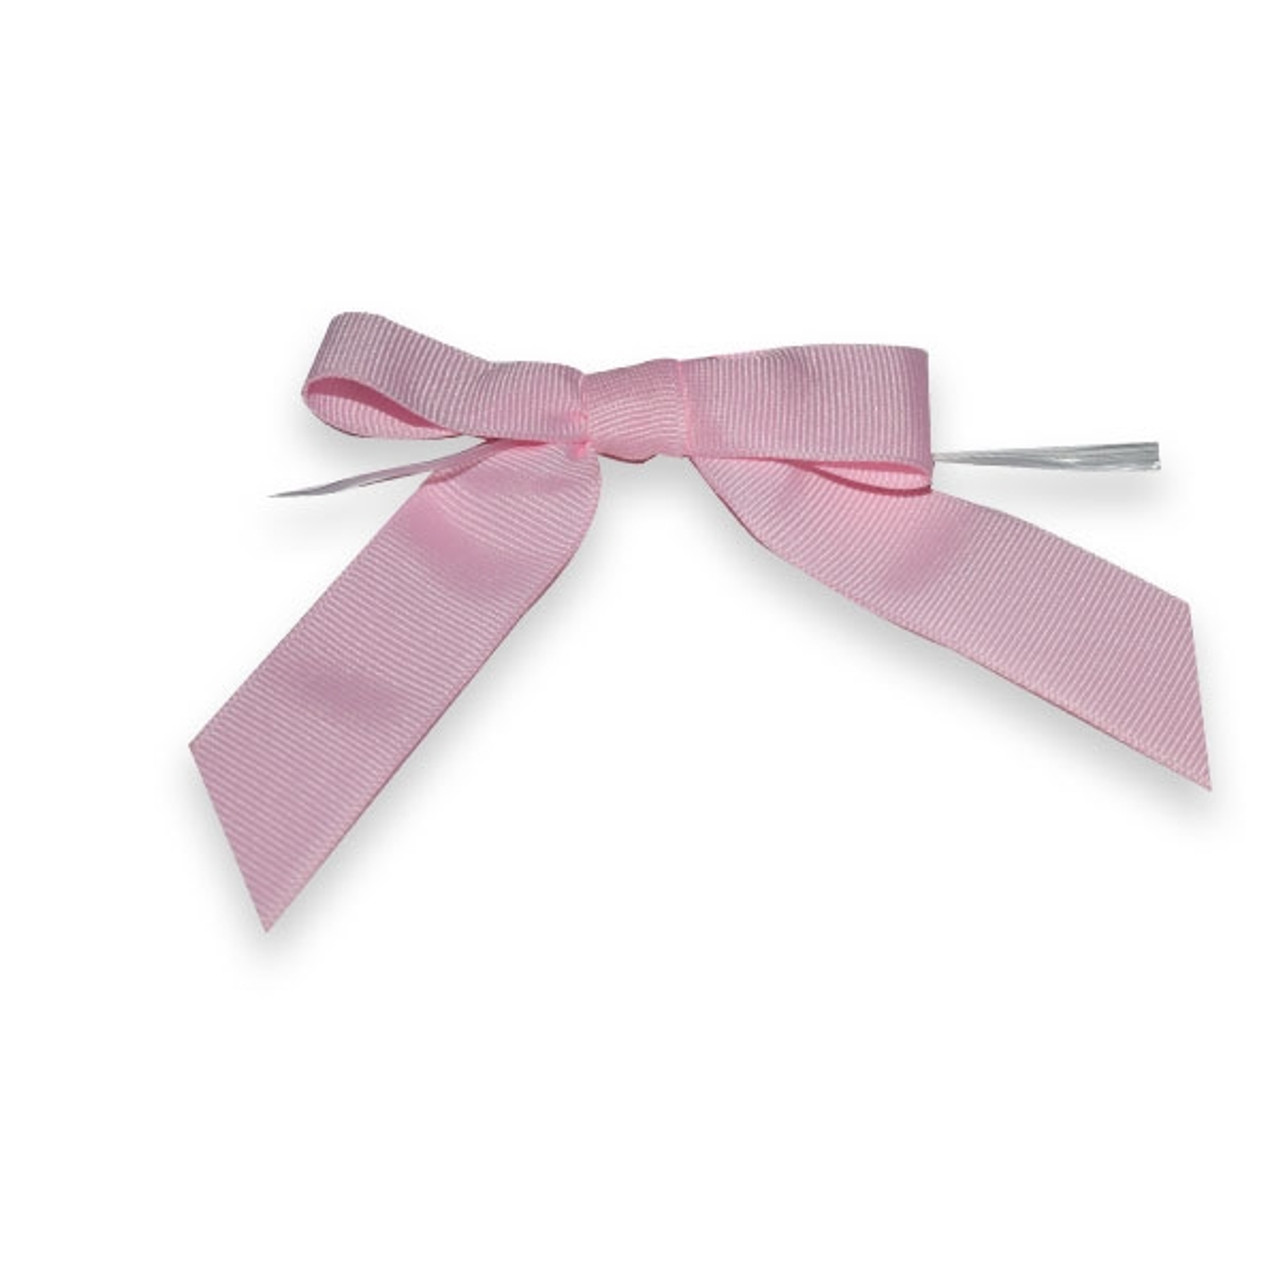 Light PINK Grosgrain Pre-tied Bow, 3.25” Bow, 5” Twist Tie, 7/8 Ribbon -  Pack of 50 Bows